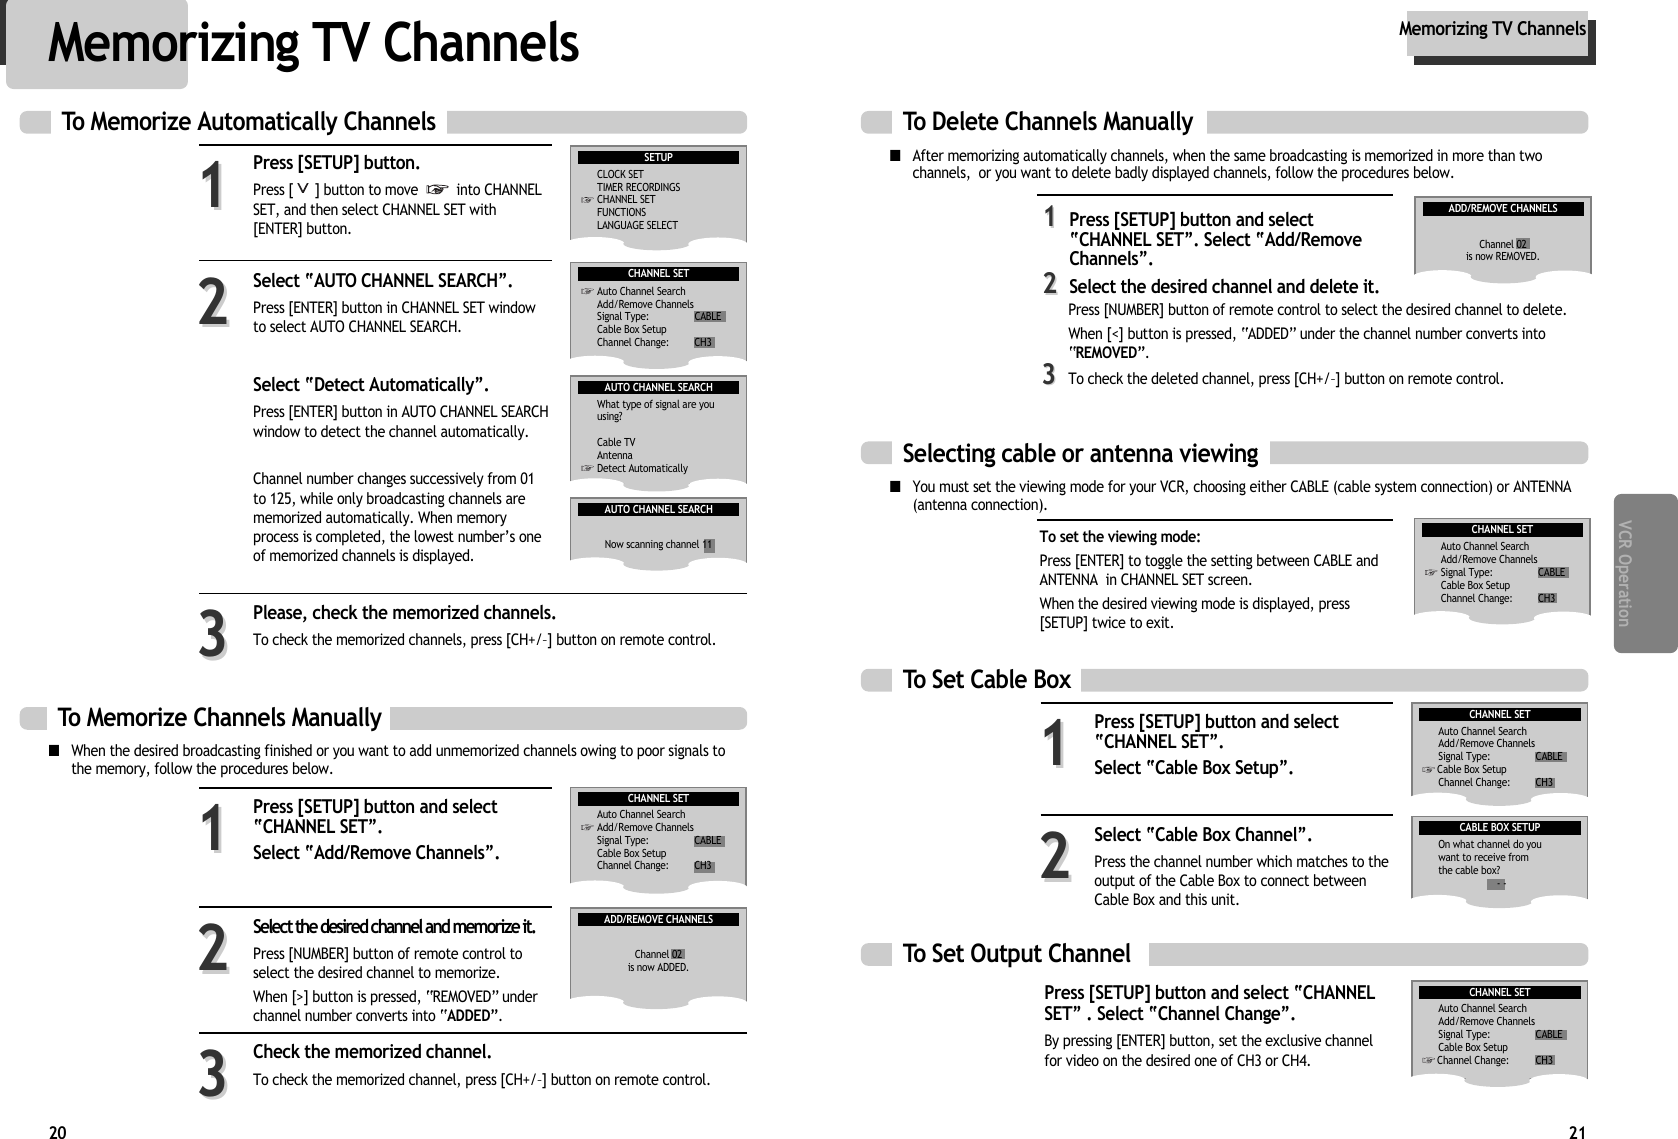 21VCR Operation20To Delete Channels Manually ■After memorizing automatically channels, when the same broadcasting is memorized in more than twochannels,  or you want to delete badly displayed channels, follow the procedures below.■You must set the viewing mode for your VCR, choosing either CABLE (cable system connection) or ANTENNA(antenna connection). 11Press [SETUP] button and selectÒCHANNEL SETÓ. Select ÒAdd/RemoveChannelsÓ. 22Select the desired channel and delete it.ADD/REMOVE CHANNELSChannel 02is now REMOVED.To Memorize Channels Manually ■When the desired broadcasting finished or you want to add unmemorized channels owing to poor signals tothe memory, follow the procedures below.Press [SETUP] button and selectÒCHANNEL SETÓ.Select ÒAdd/Remove ChannelsÓ. 11Select the desired channel and memorize it. Press [NUMBER] button of remote control toselect the desired channel to memorize. When [&gt;] button is pressed, ÒREMOVEDÓ underchannel number converts into ÒADDEDÓ.22Check the memorized channel.To check the memorized channel, press [CH+/Ð] button on remote control. 33ADD/REMOVE CHANNELSChannel 02is now ADDED.Memorizing TV ChannelsMemorizing TV ChannelsPress [SETUP] button.Press [ ] button to move  into CHANNELSET, and then select CHANNEL SET with[ENTER] button. Select ÒAUTO CHANNEL SEARCHÓ. Press [ENTER] button in CHANNEL SET windowto select AUTO CHANNEL SEARCH. Select ÒDetect AutomaticallyÓ. Press [ENTER] button in AUTO CHANNEL SEARCHwindow to detect the channel automatically.Channel number changes successively from 01to 125, while only broadcasting channels arememorized automatically. When memoryprocess is completed, the lowest numberÕs oneof memorized channels is displayed.Please, check the memorized channels.To check the memorized channels, press [CH+/Ð] button on remote control. 112233To Memorize Automatically ChannelsSETUPCLOCK SETTIMER RECORDINGSCHANNEL SETFUNCTIONSLANGUAGE SELECTAUTO CHANNEL SEARCHWhat type of signal are you using?Cable TVAntennaDetect AutomaticallyAUTO CHANNEL SEARCHNow scanning channel 11CHANNEL SETAuto Channel SearchAdd/Remove ChannelsSignal Type: CABLECable Box SetupChannel Change: CH3CHANNEL SETAuto Channel SearchAdd/Remove ChannelsSignal Type: CABLECable Box SetupChannel Change: CH3Selecting cable or antenna viewingTo set the viewing mode:Press [ENTER] to toggle the setting between CABLE andANTENNA  in CHANNEL SET screen. When the desired viewing mode is displayed, press[SETUP] twice to exit.CHANNEL SETAuto Channel SearchAdd/Remove ChannelsSignal Type: CABLECable Box SetupChannel Change: CH3To Set Cable BoxTo Set Output Channel Press [SETUP] button and select ÒCHANNELSETÓ . Select ÒChannel ChangeÓ.  By pressing [ENTER] button, set the exclusive channelfor video on the desired one of CH3 or CH4.Press [SETUP] button and selectÒCHANNEL SETÓ.Select ÒCable Box SetupÓ. 11Select ÒCable Box ChannelÓ. Press the channel number which matches to theoutput of the Cable Box to connect betweenCable Box and this unit.22CABLE BOX SETUPOn what channel do youwant to receive fromthe cable box?- -CHANNEL SETAuto Channel SearchAdd/Remove ChannelsSignal Type: CABLECable Box SetupChannel Change: CH3CHANNEL SETAuto Channel SearchAdd/Remove ChannelsSignal Type: CABLECable Box SetupChannel Change: CH3Press [NUMBER] button of remote control to select the desired channel to delete. When [&lt;] button is pressed, ÒADDEDÓ under the channel number converts intoÒREMOVEDÓ. 33To check the deleted channel, press [CH+/Ð] button on remote control. 